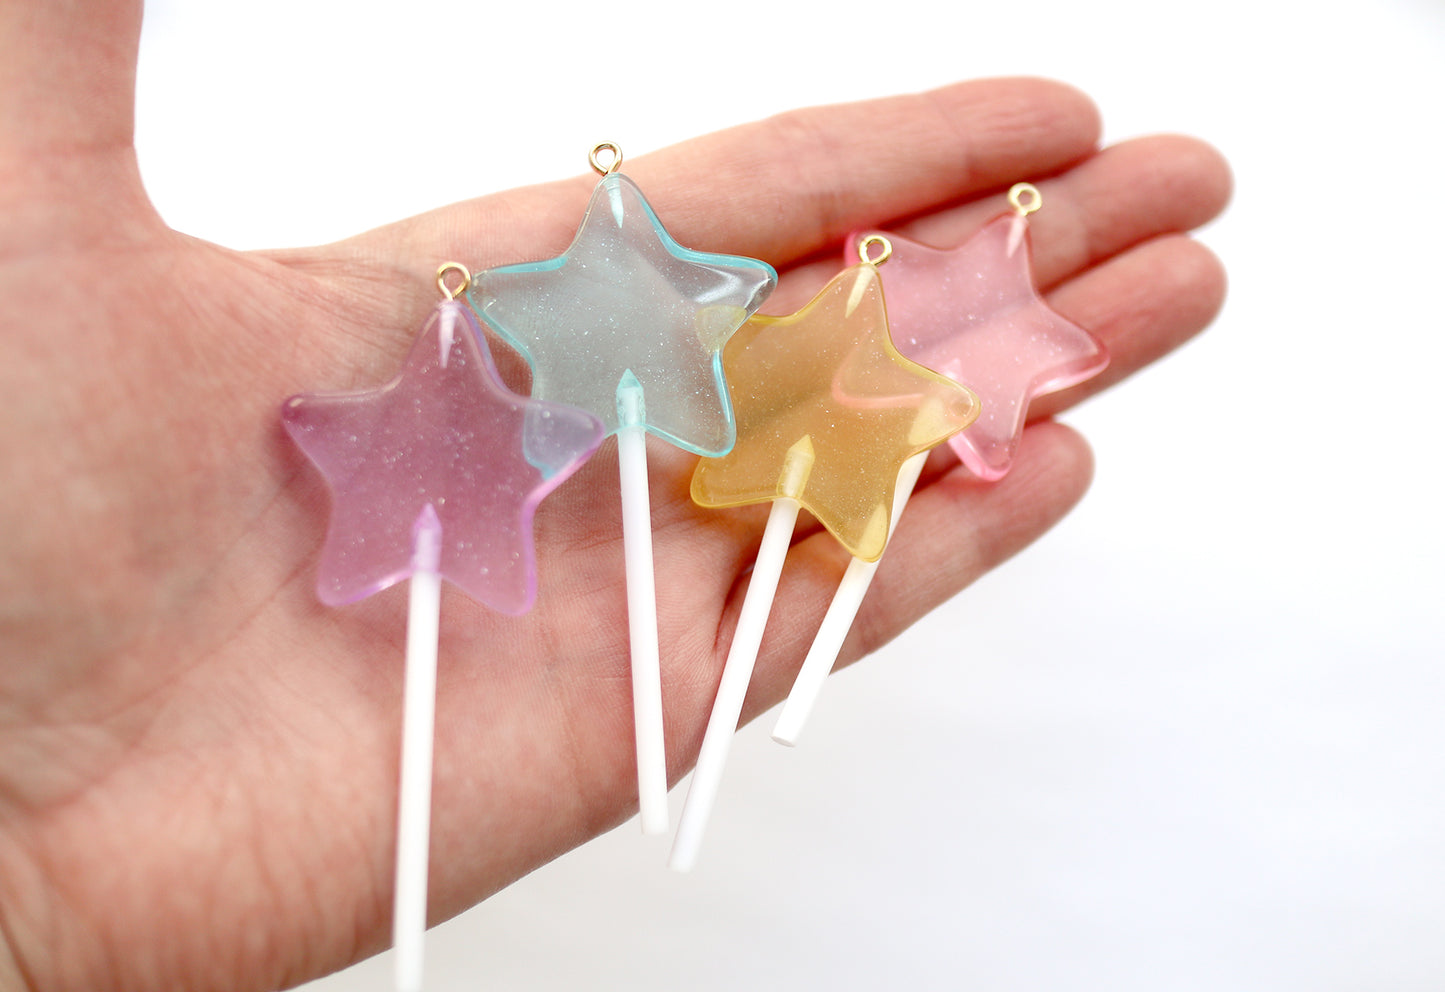 Lollipop Charm - 75mm Bright Star Shaped Fake Lollipop Kawaii Fairy Magic Wand Candy Resin Charms - Mixed Colors - 4 pc set